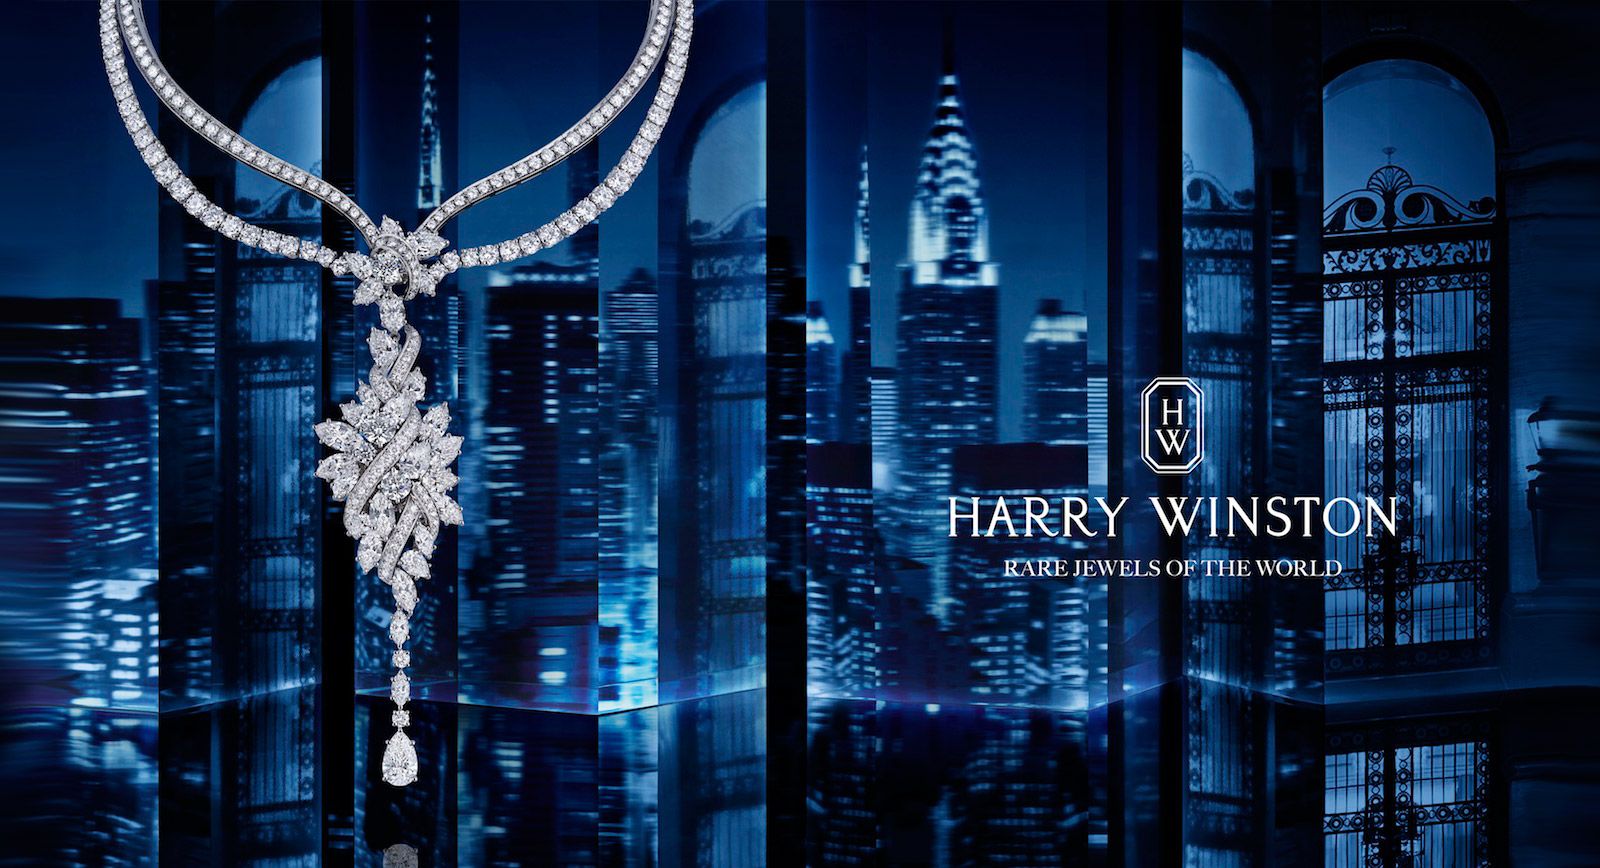 New Collection: Secrets By Harry Winston